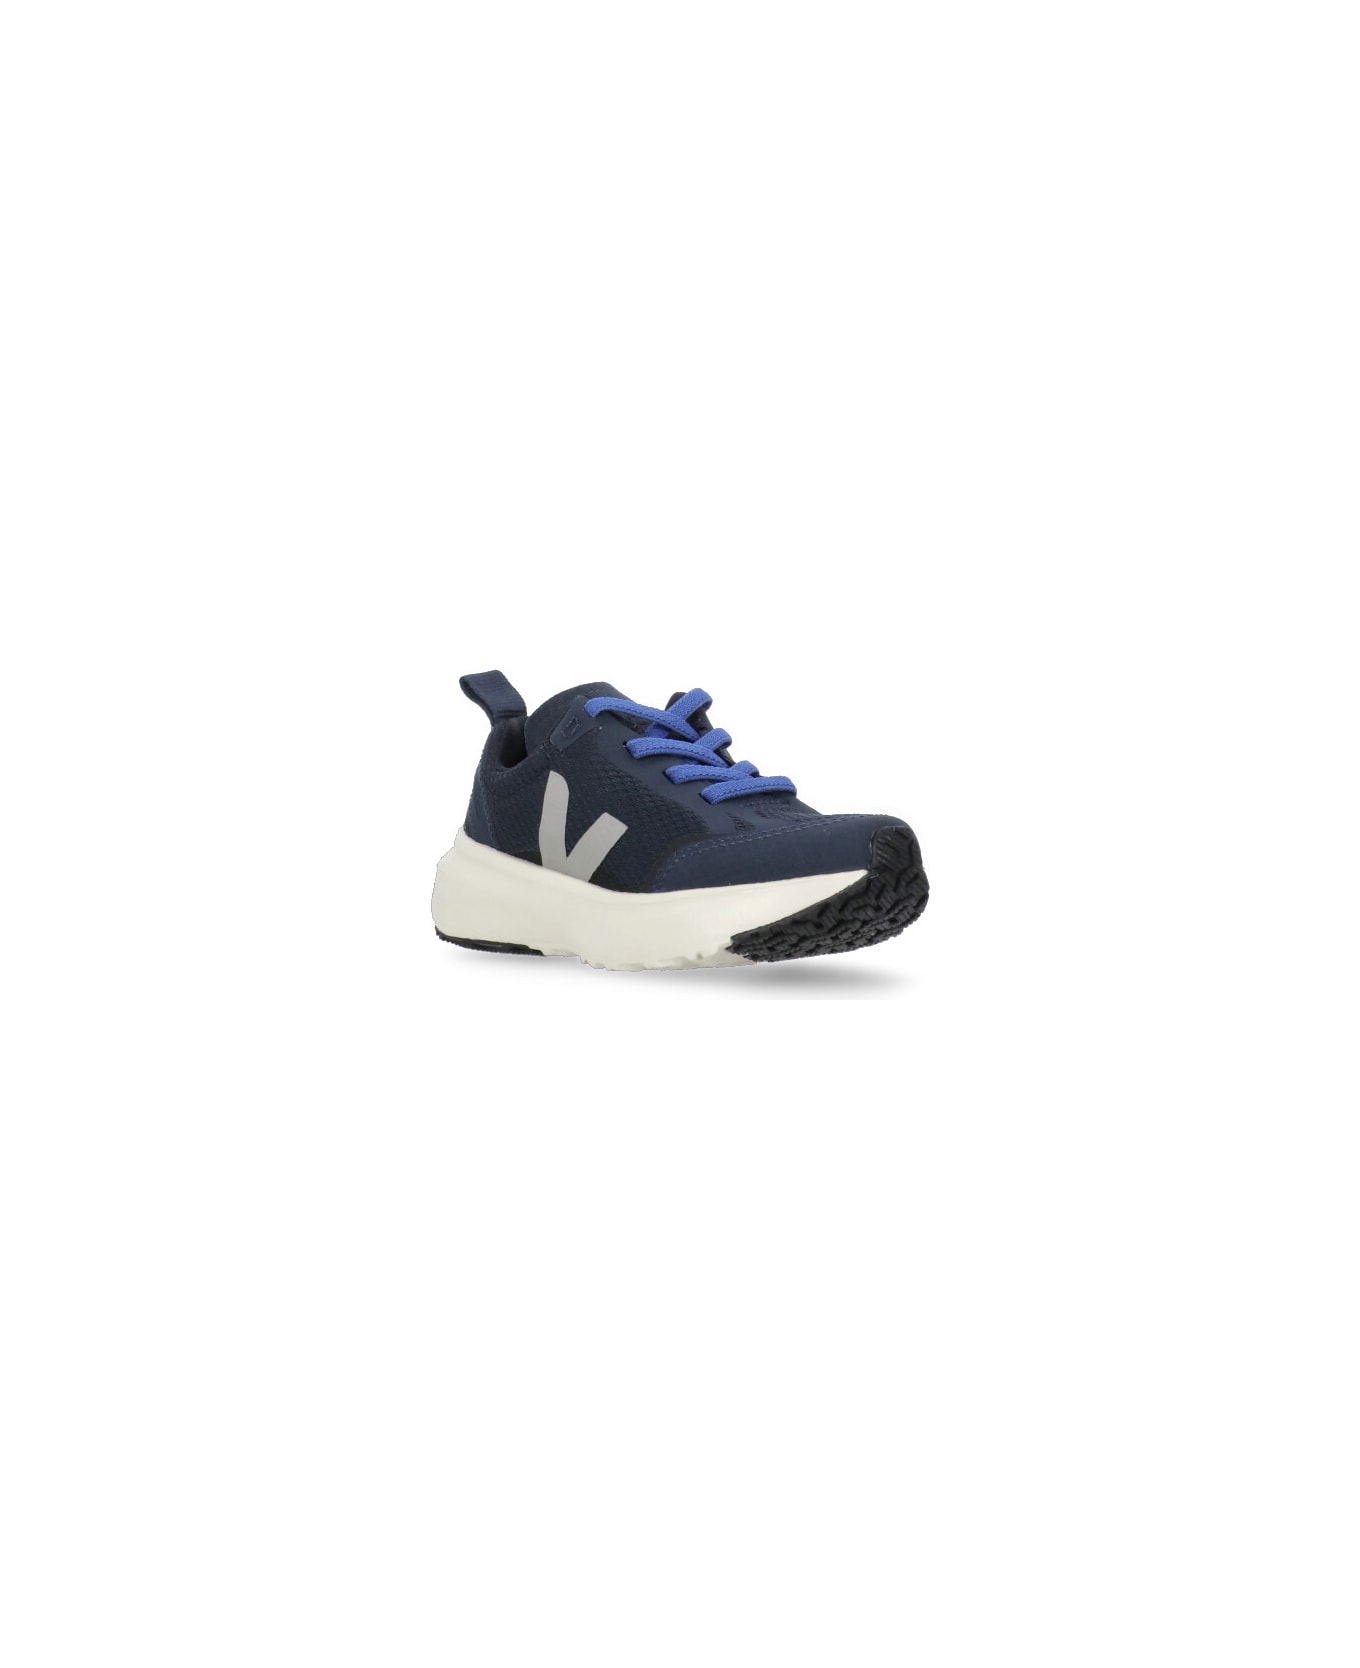 Veja Canary Sneakers - Blue シューズ